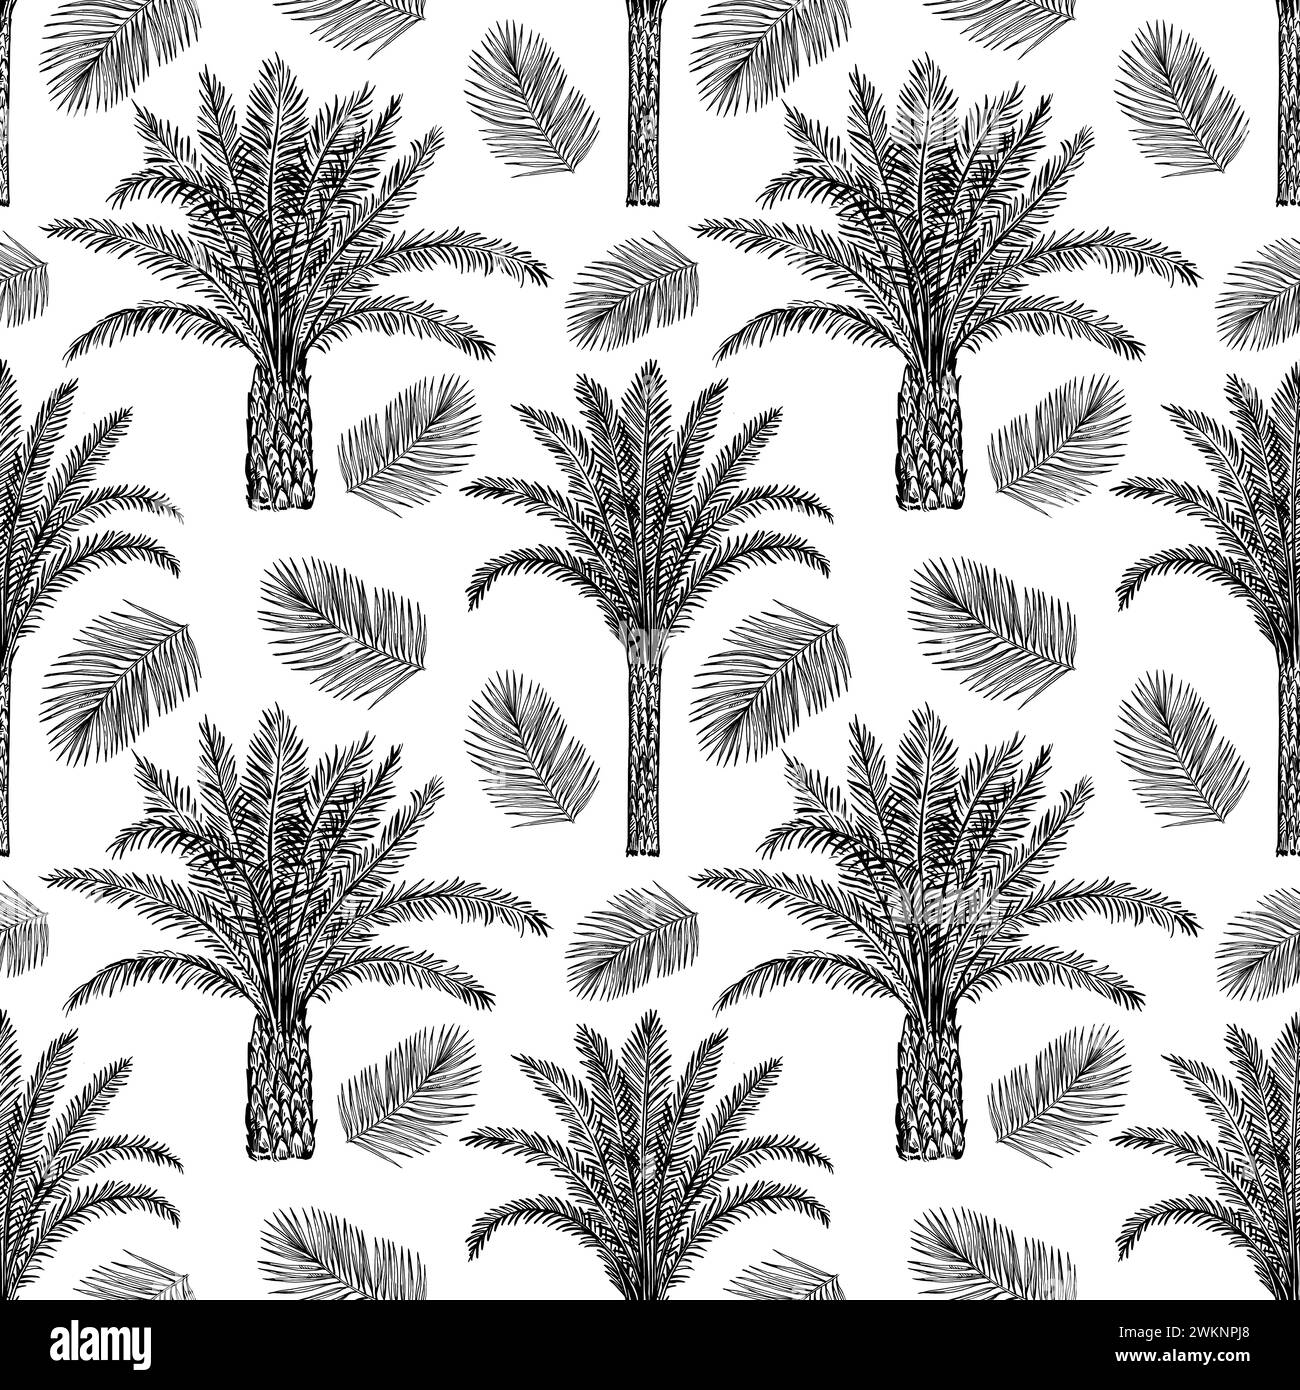 Seamless pattern with palm trees trees and leaves. Toile de Jouy retro engraving style. Stock Vector